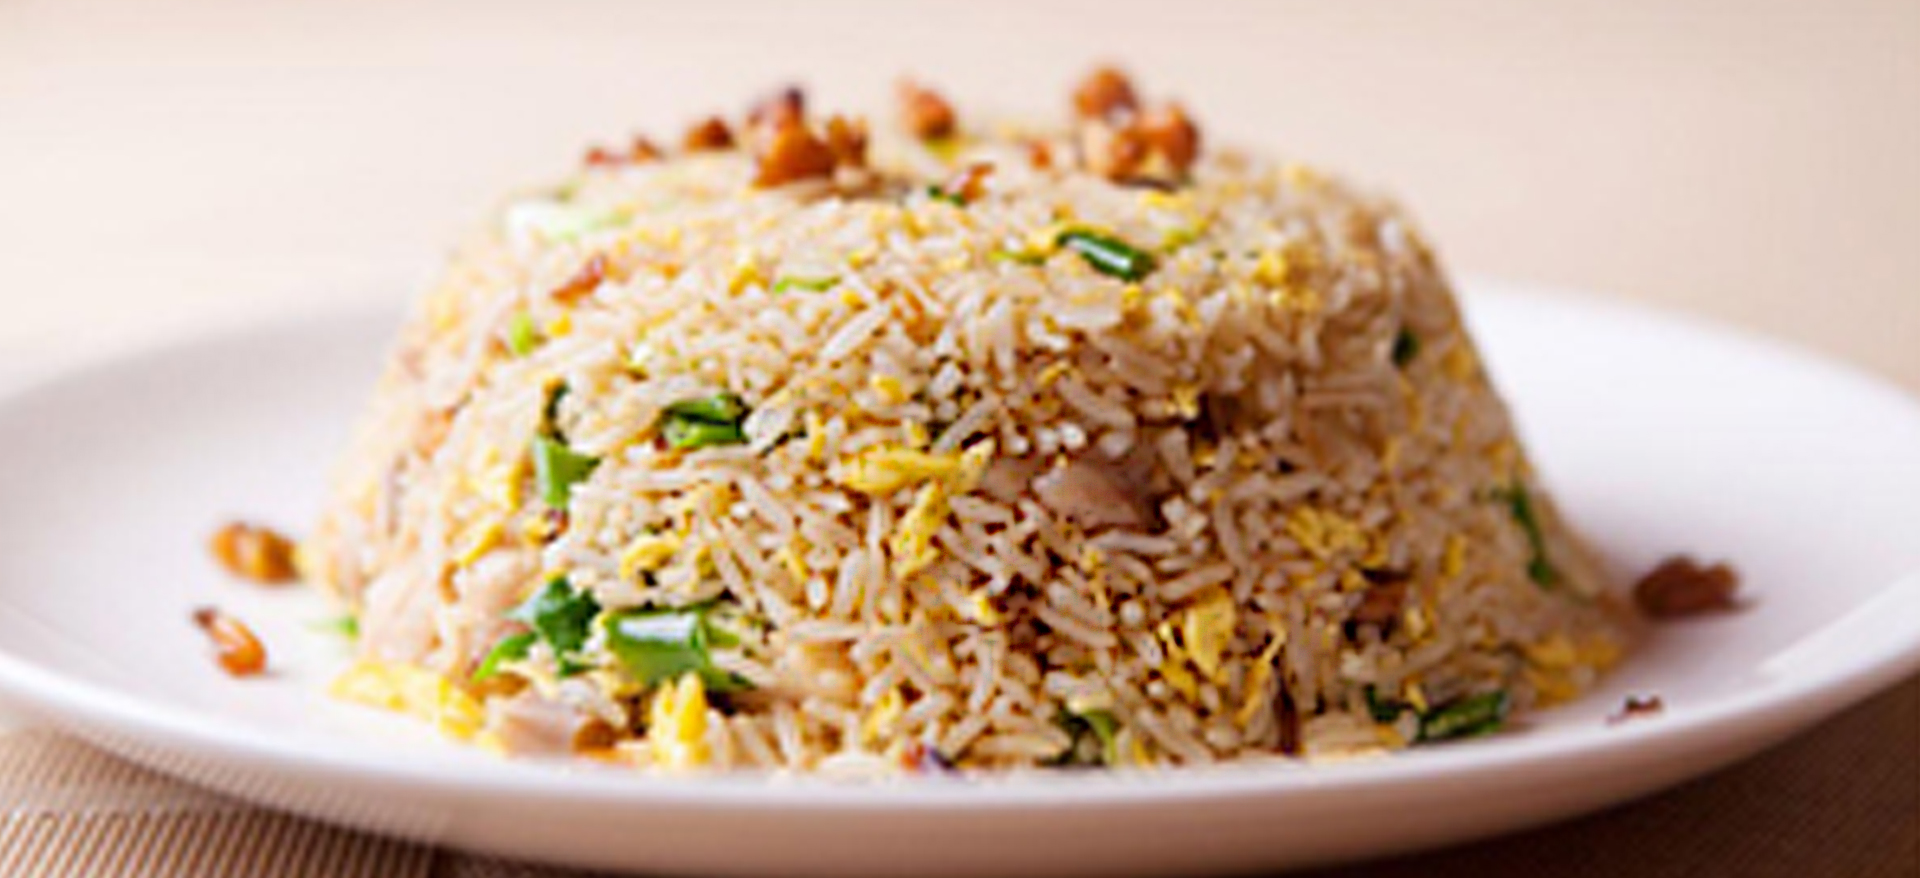 Gallery - Hibachi Rice - Rice & Noodle - Chinese Food - Asian Food - McKinney TX